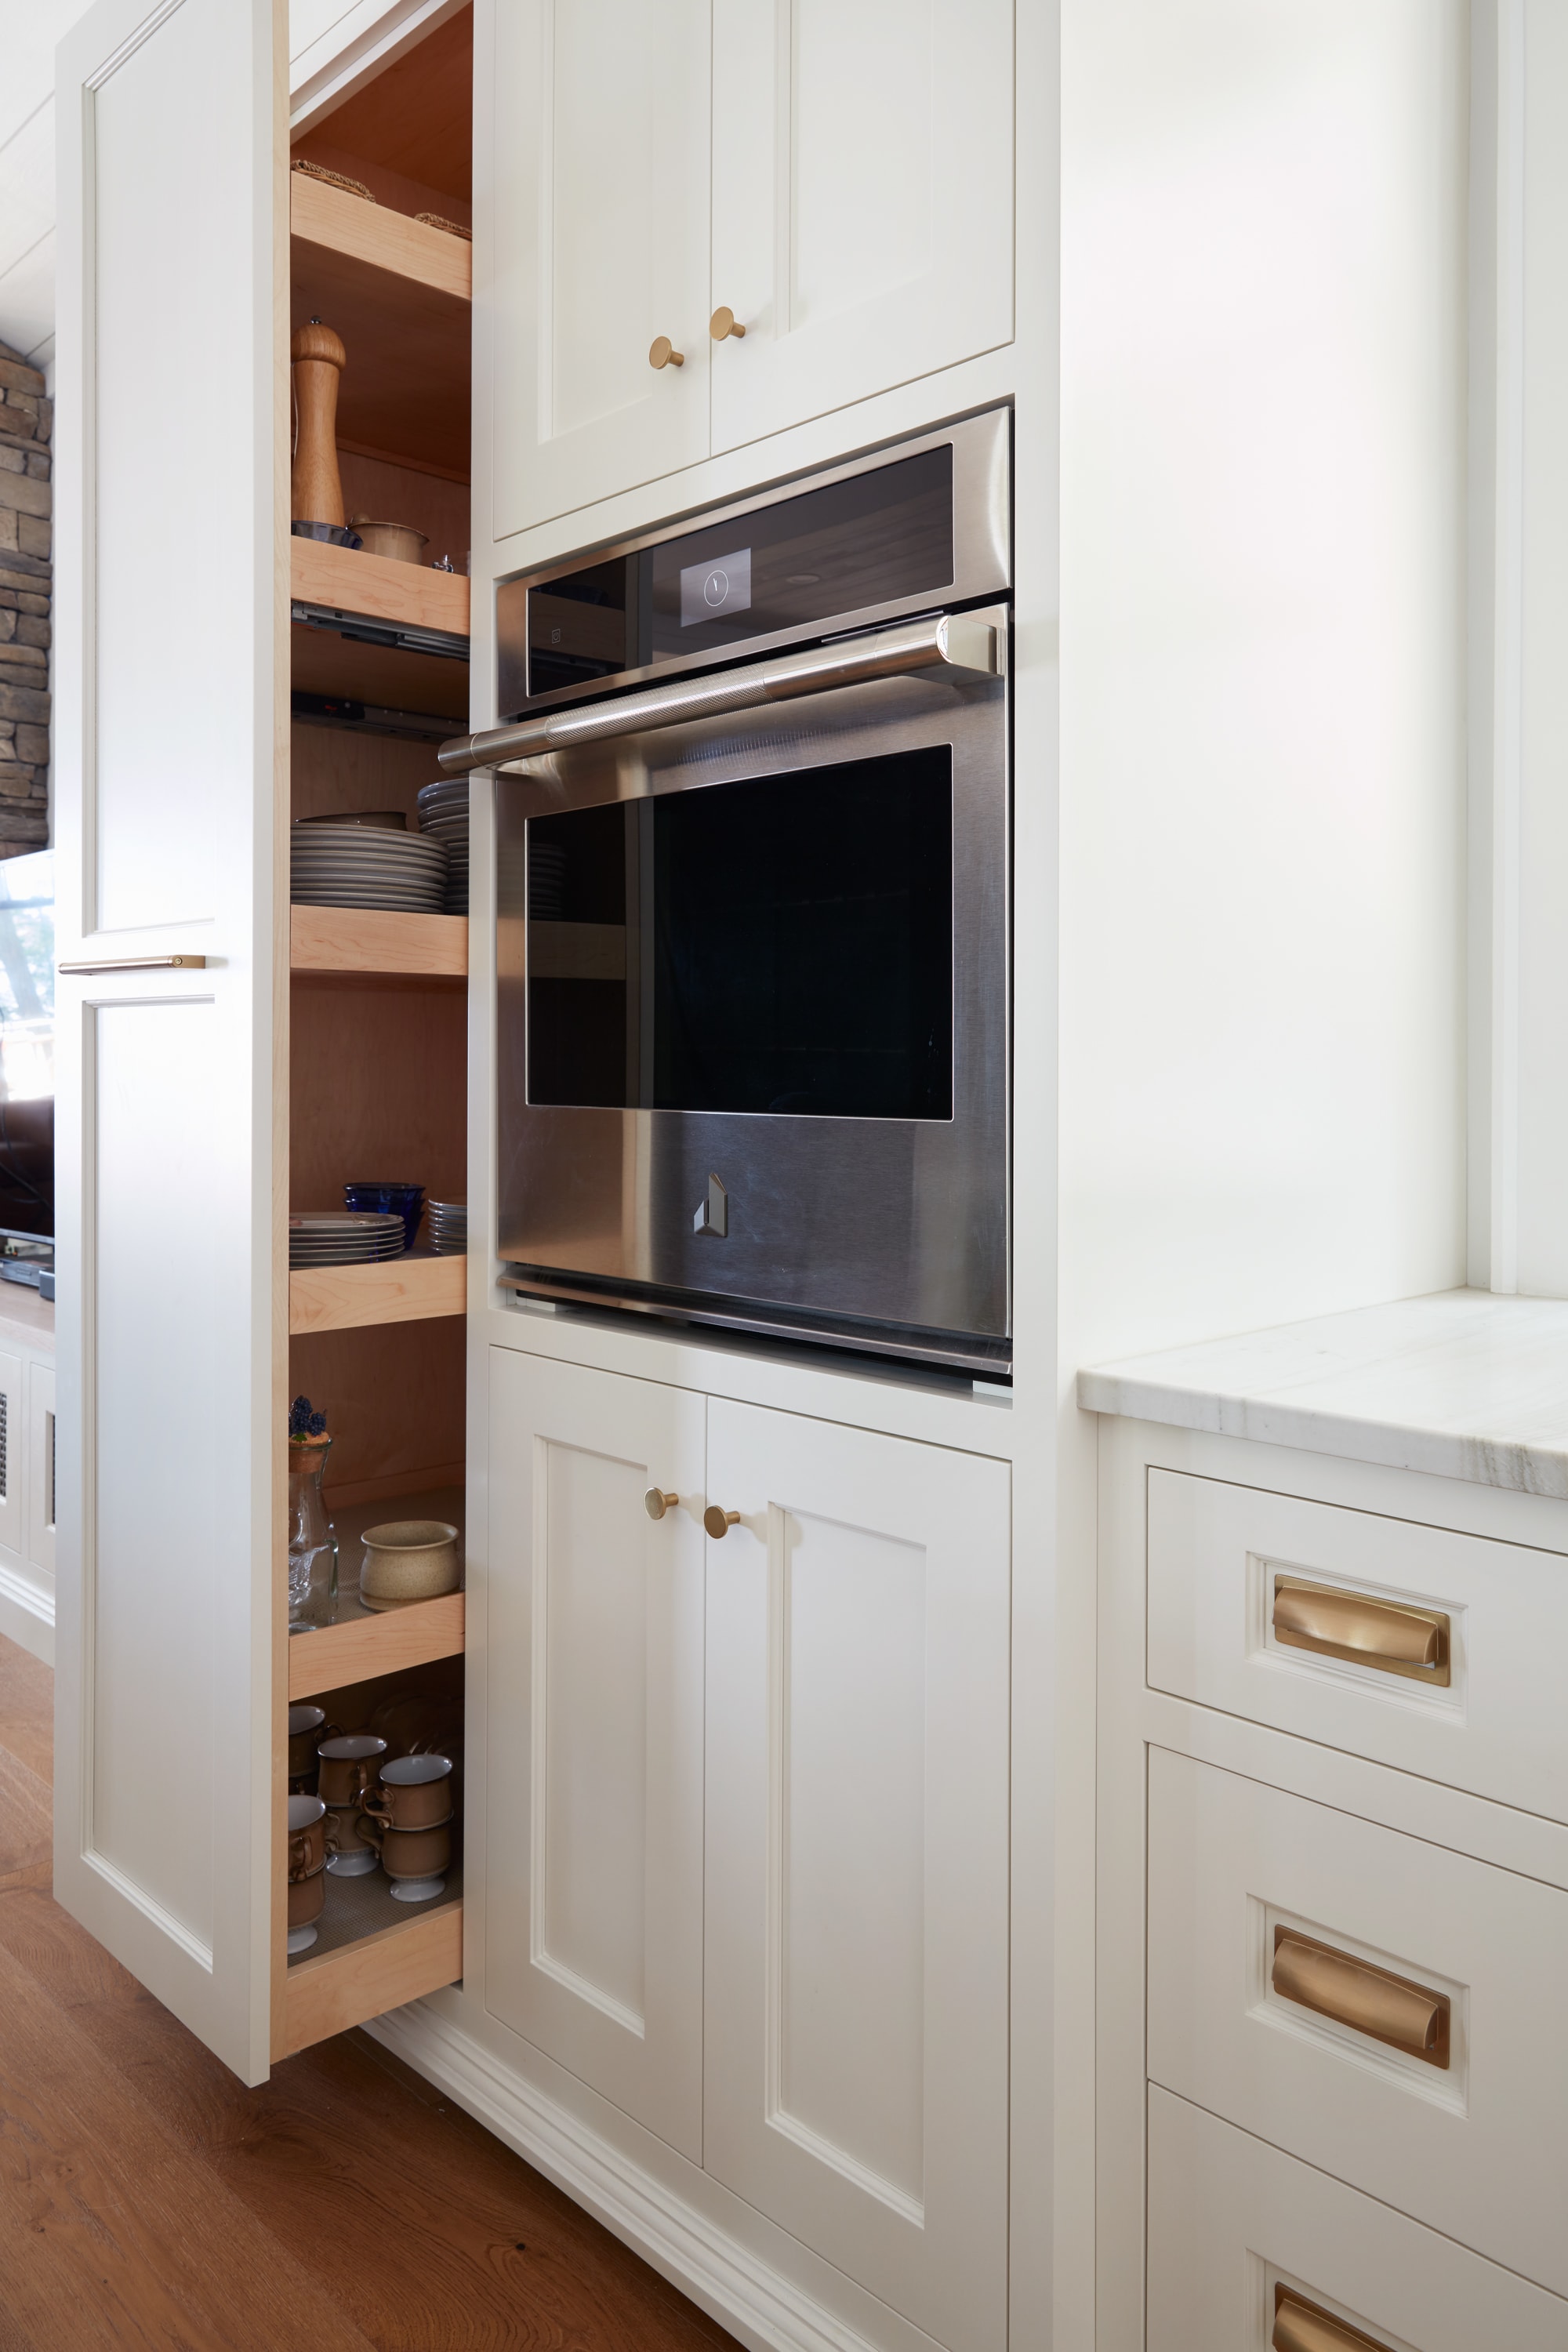 White pantry pull-out cabinet beside wall oven